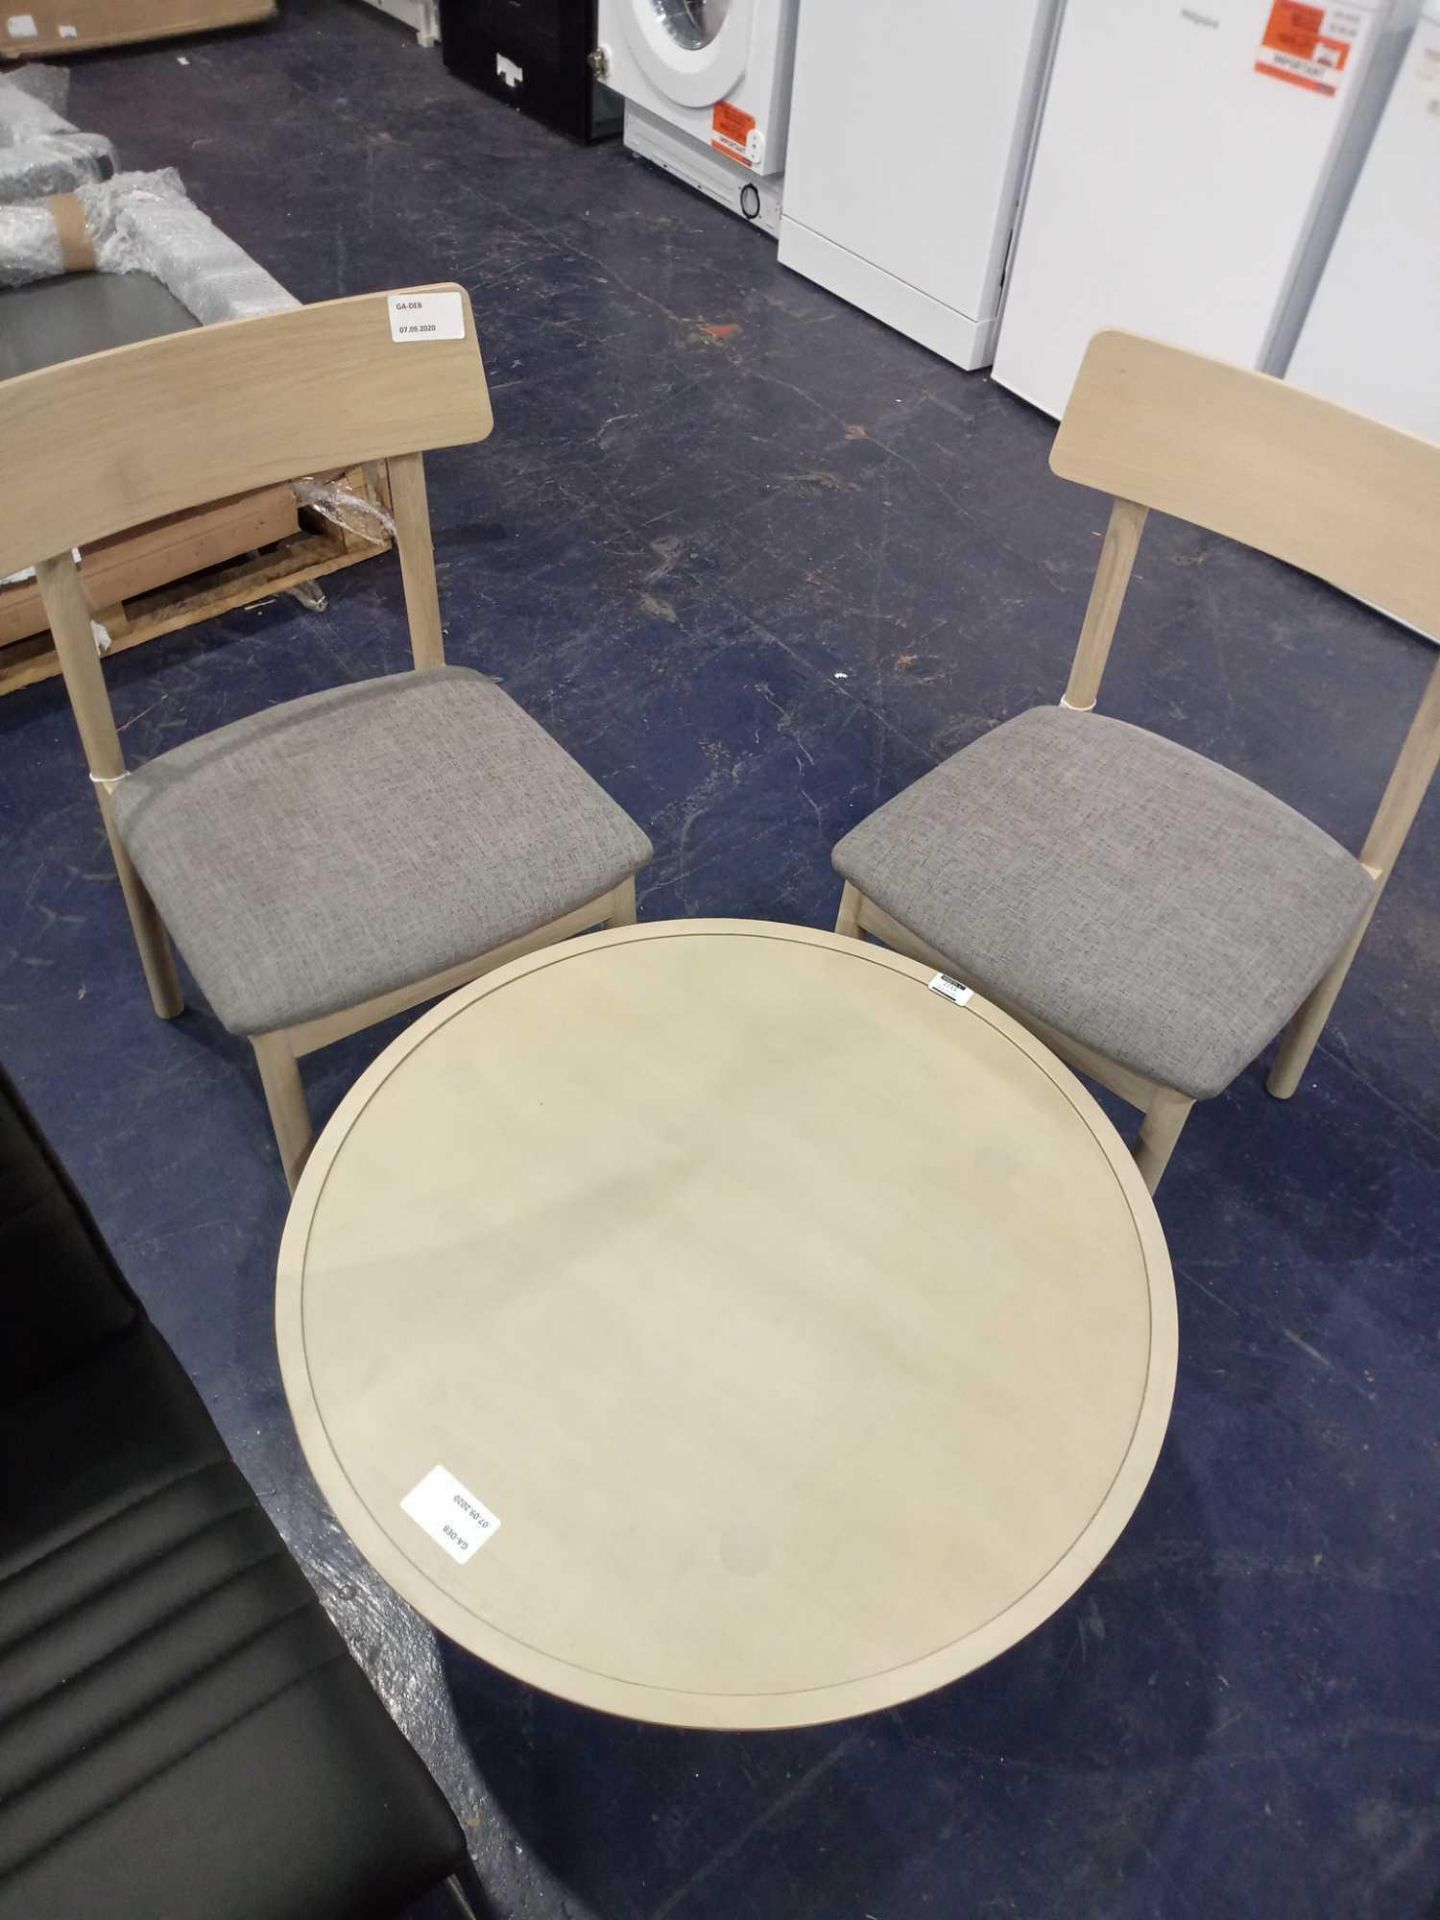 Rrp £400 Debenhams Designer Home Modern Contemporary Wooden Coffee Table And Two Matching Chairs